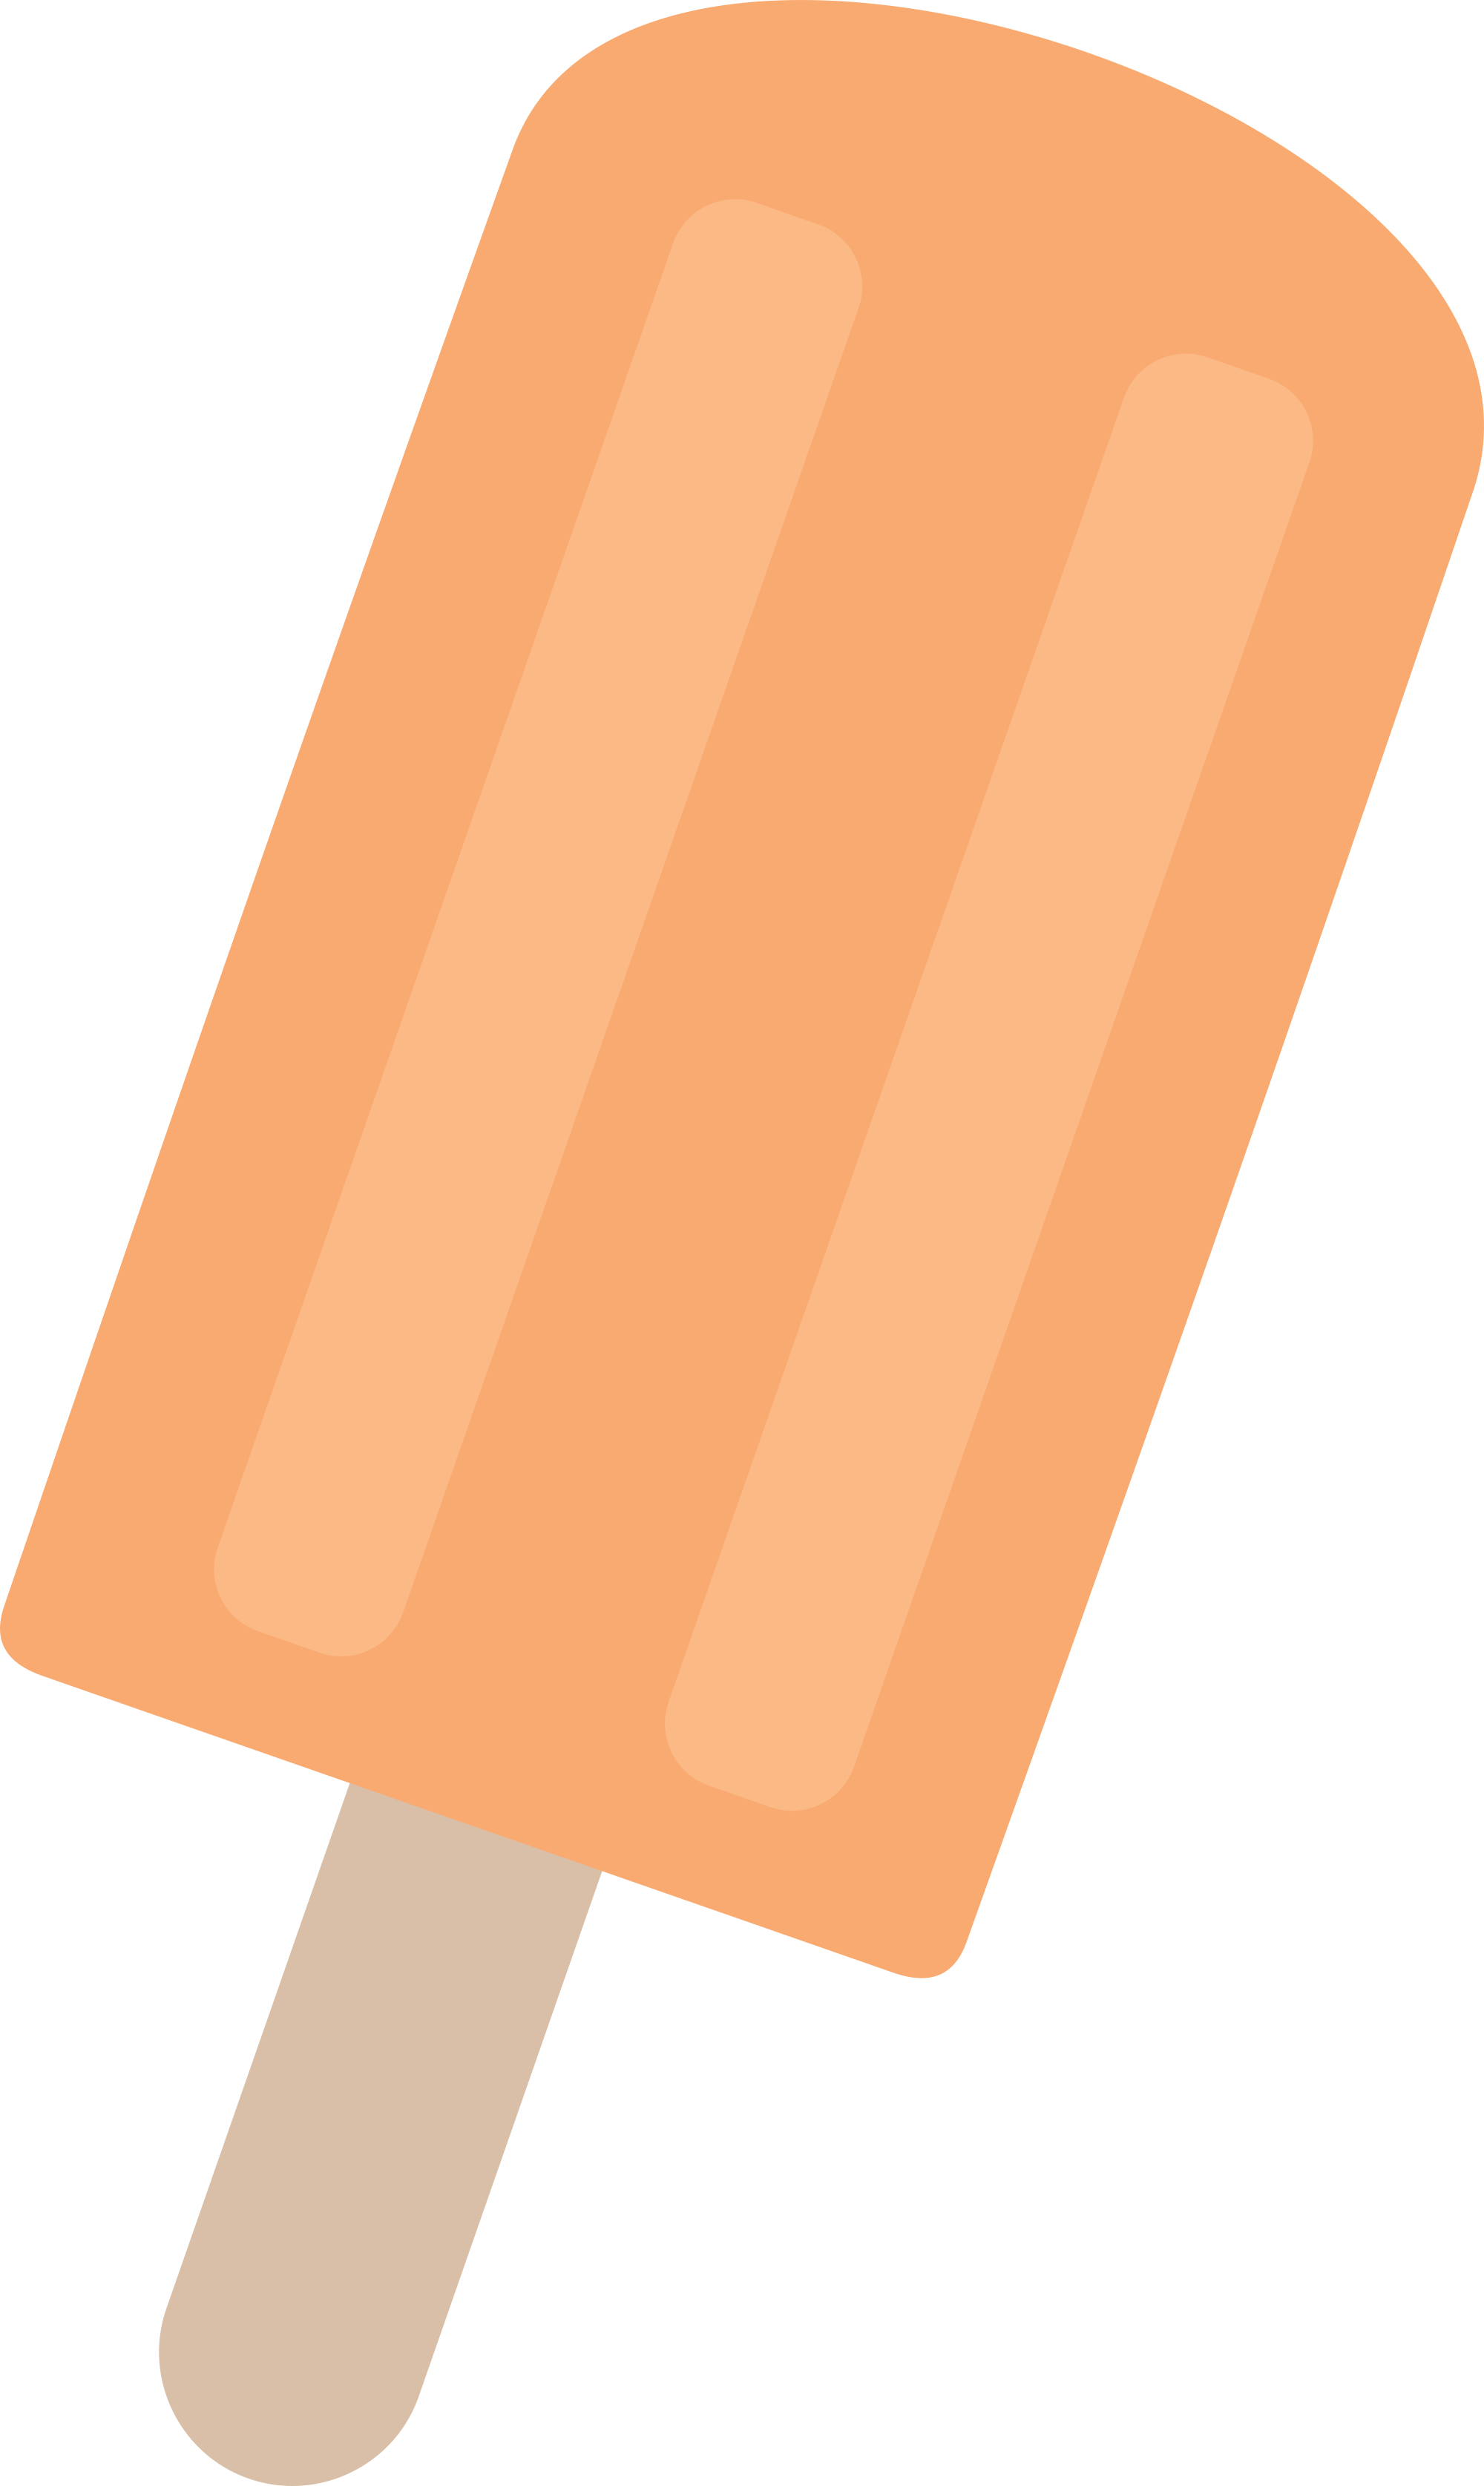 Popsicle Vector at GetDrawings | Free download